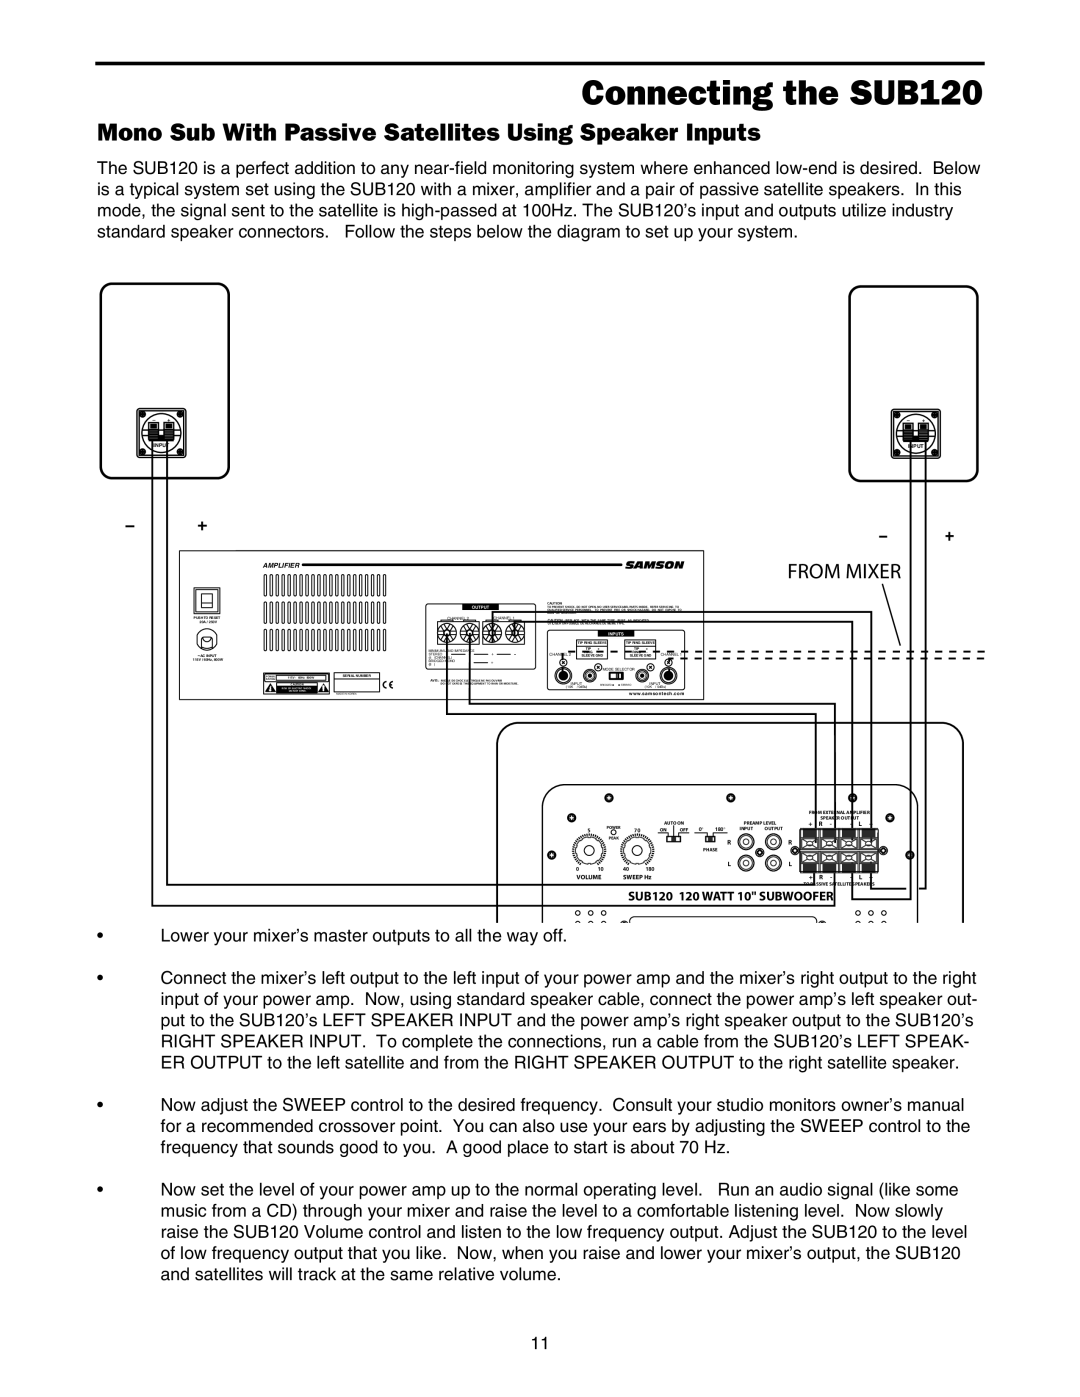 Samson Sub120 owner manual Connecting the SUB120, From Mixer 